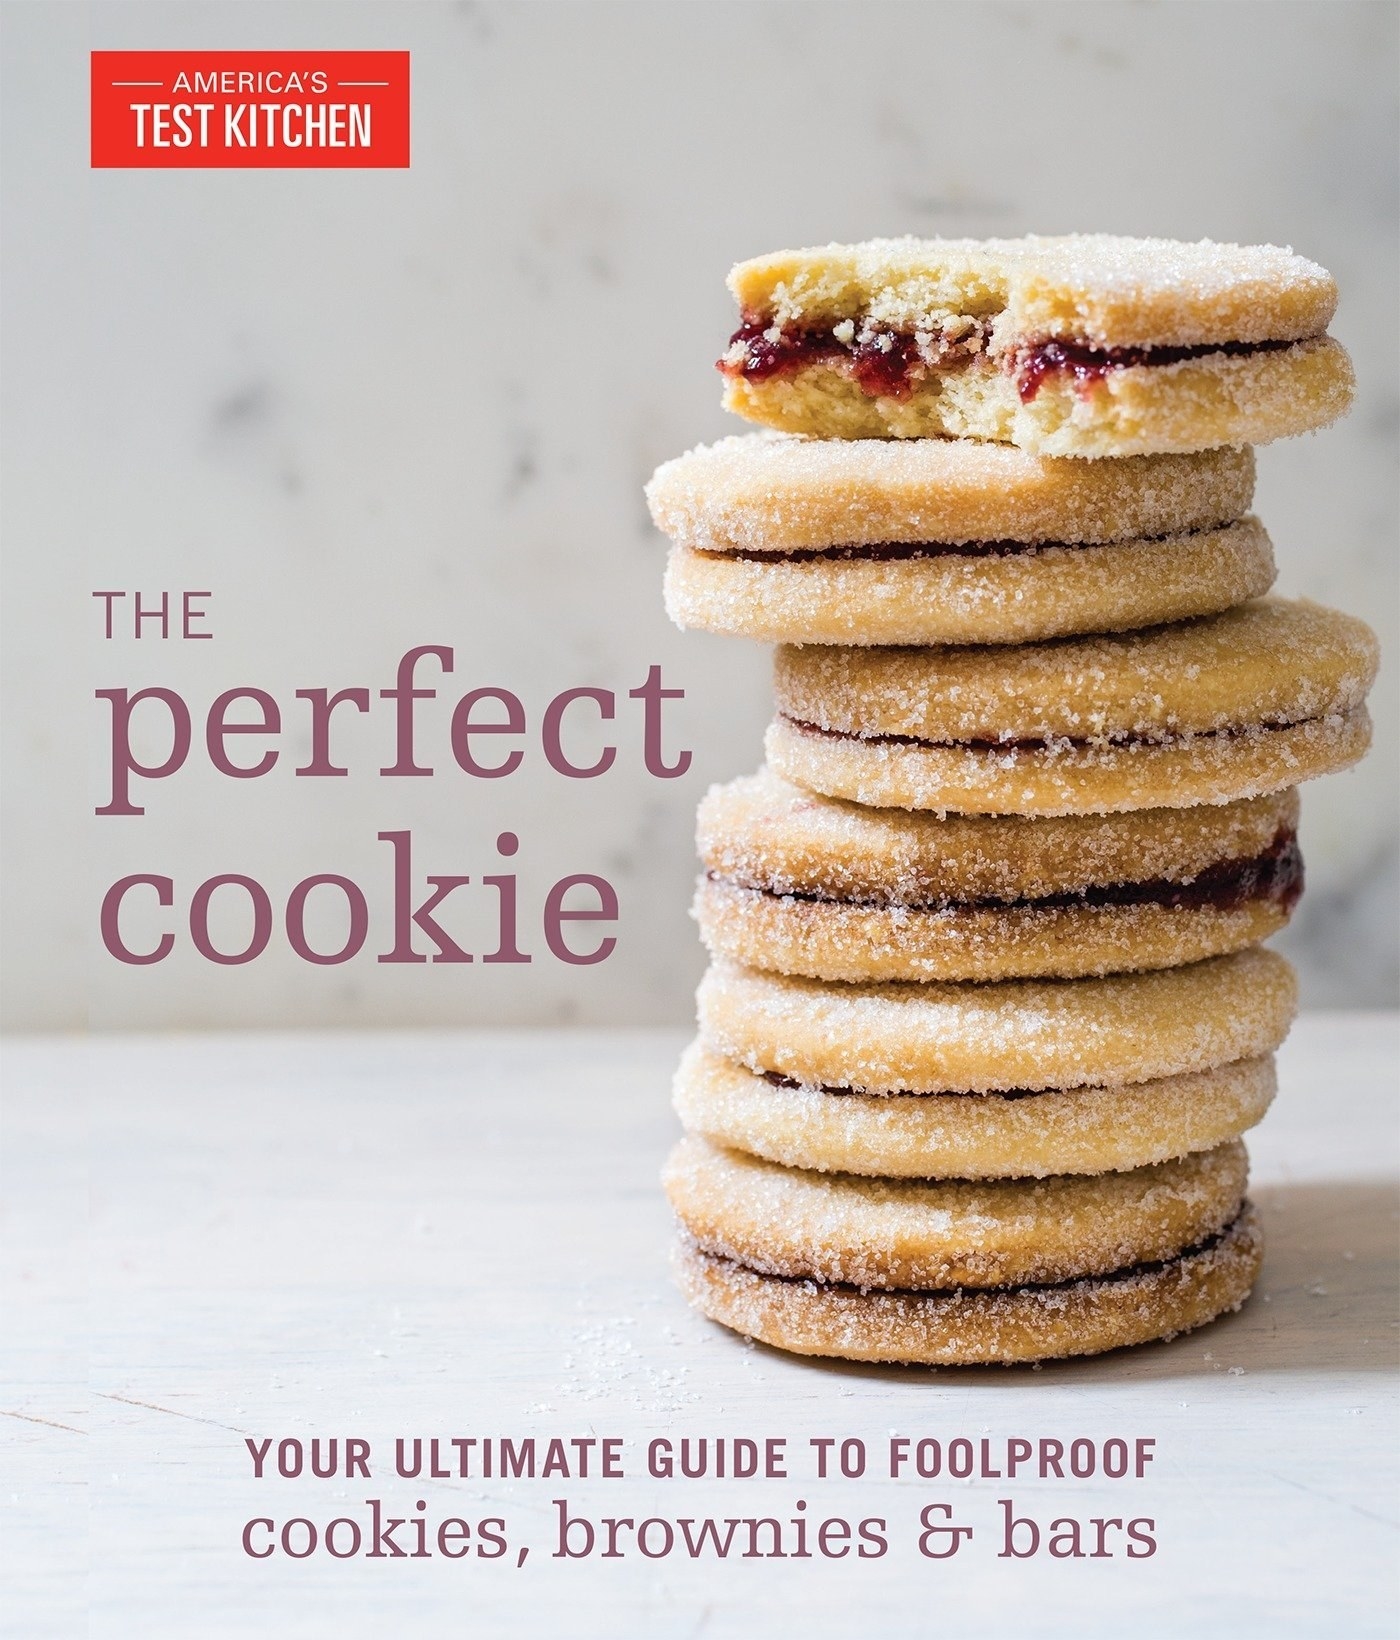 The cover of the cookbook